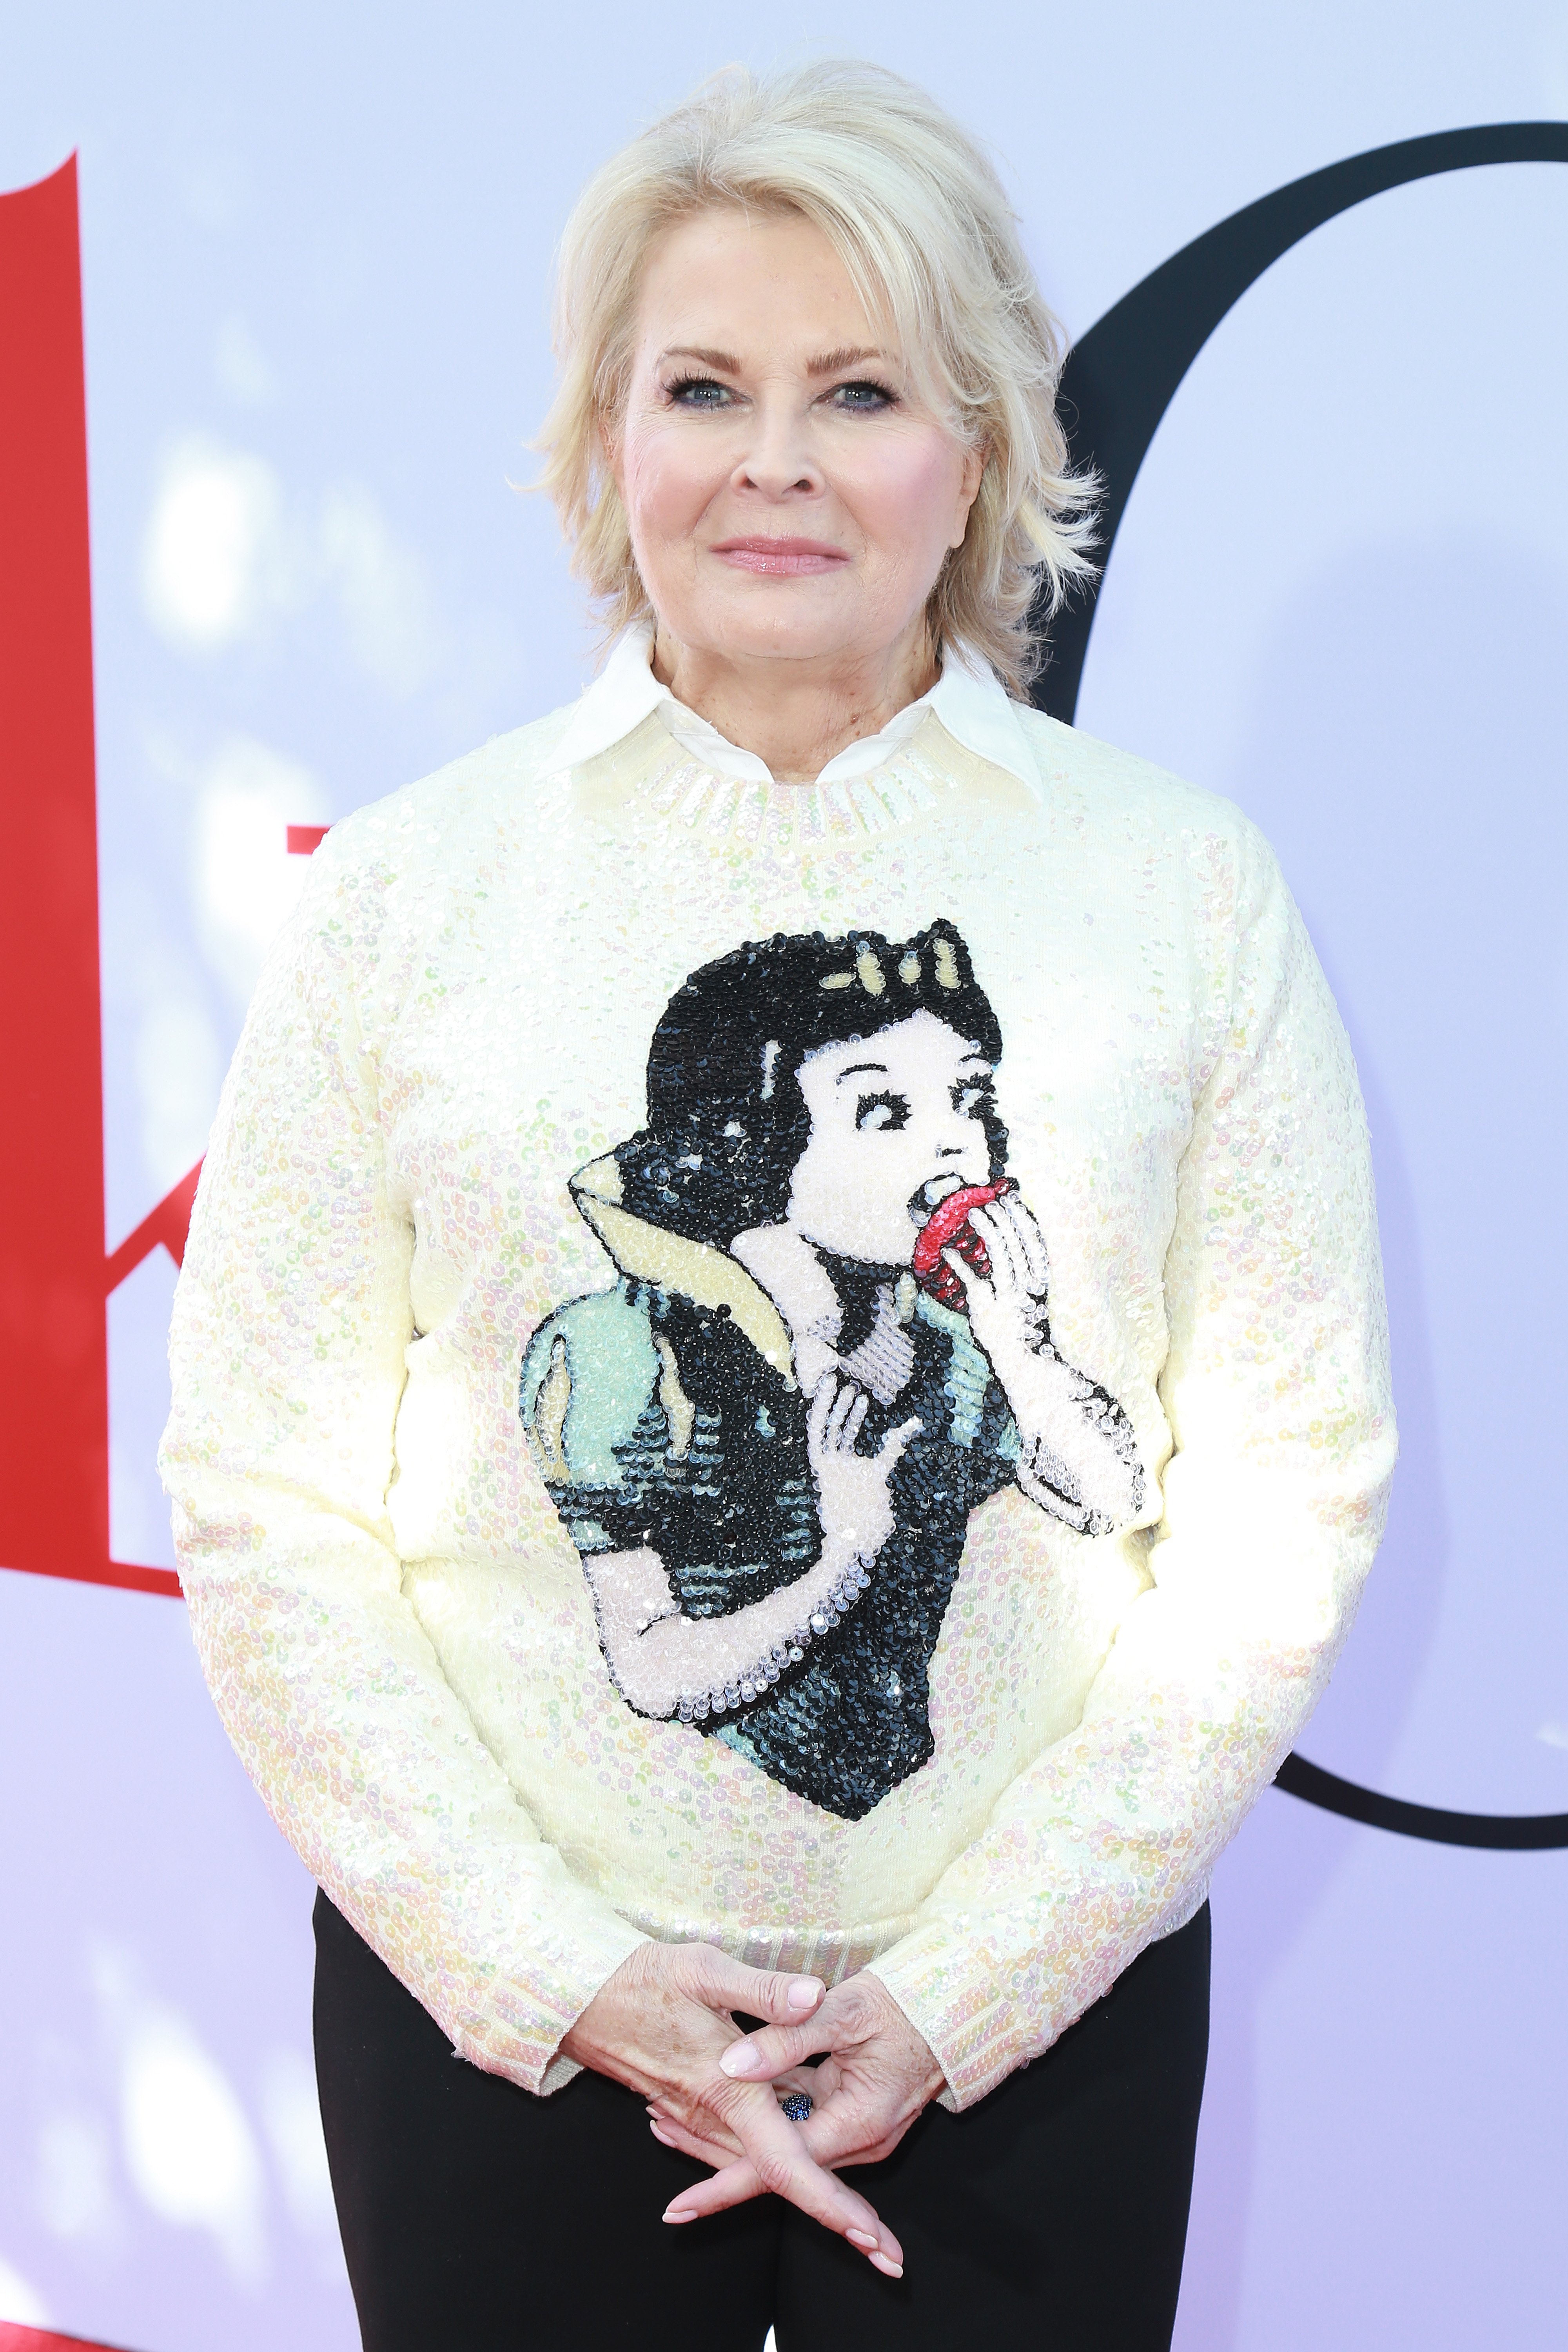 Candice Bergen attends Paramount Pictures' Premiere Of "Book Club" - Red Carpet at Regency Village Theatre on May 6, 2018, in Westwood, California. | Source: Getty Images.